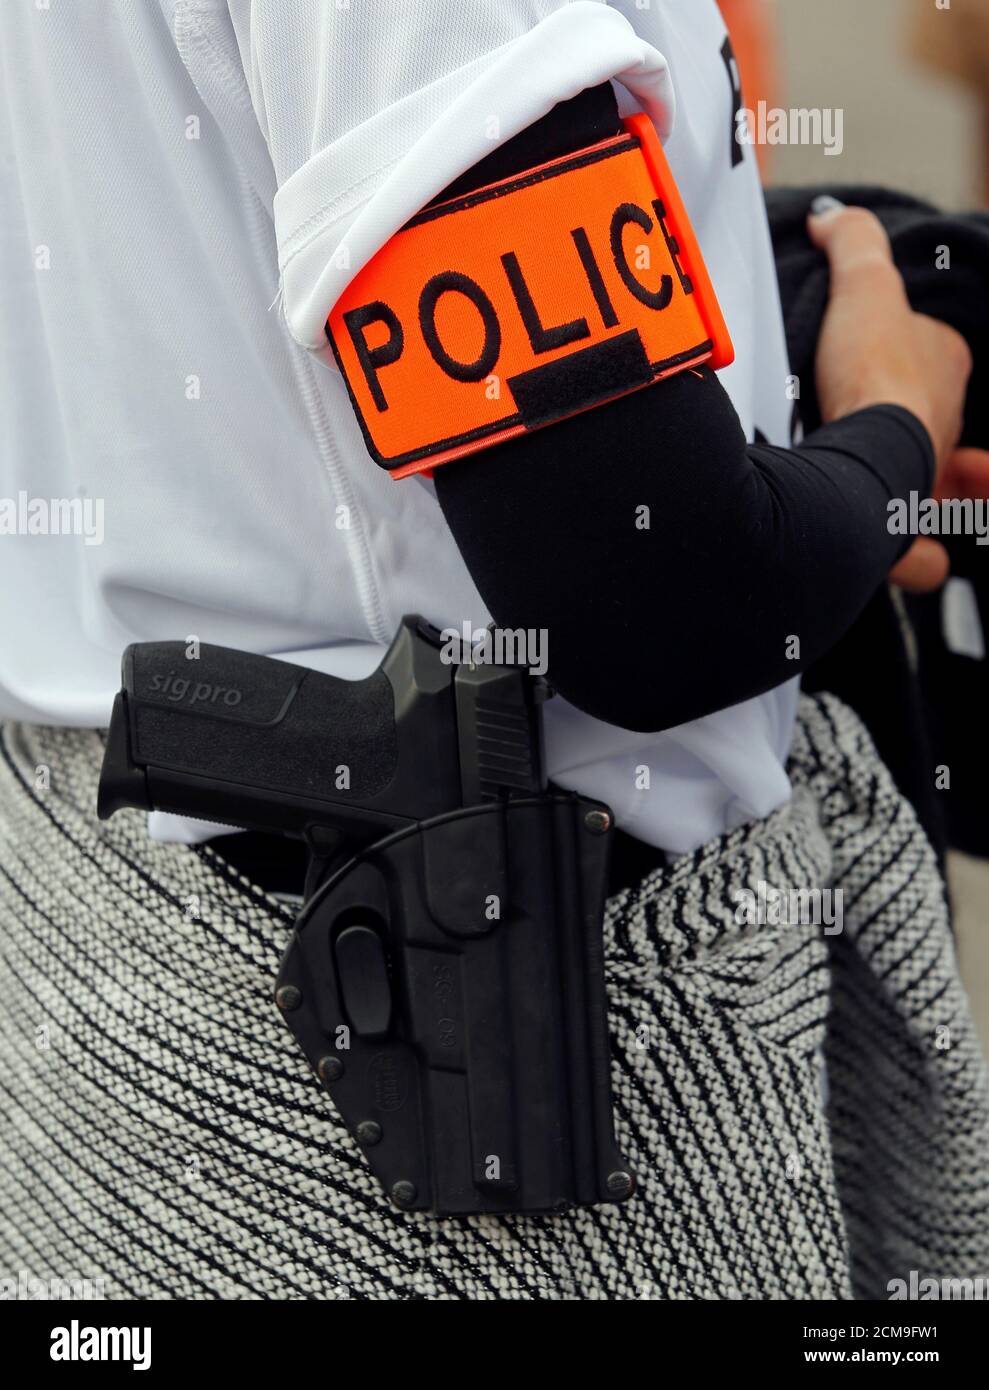 Police Armband High Resolution Stock Photography and Images - Alamy